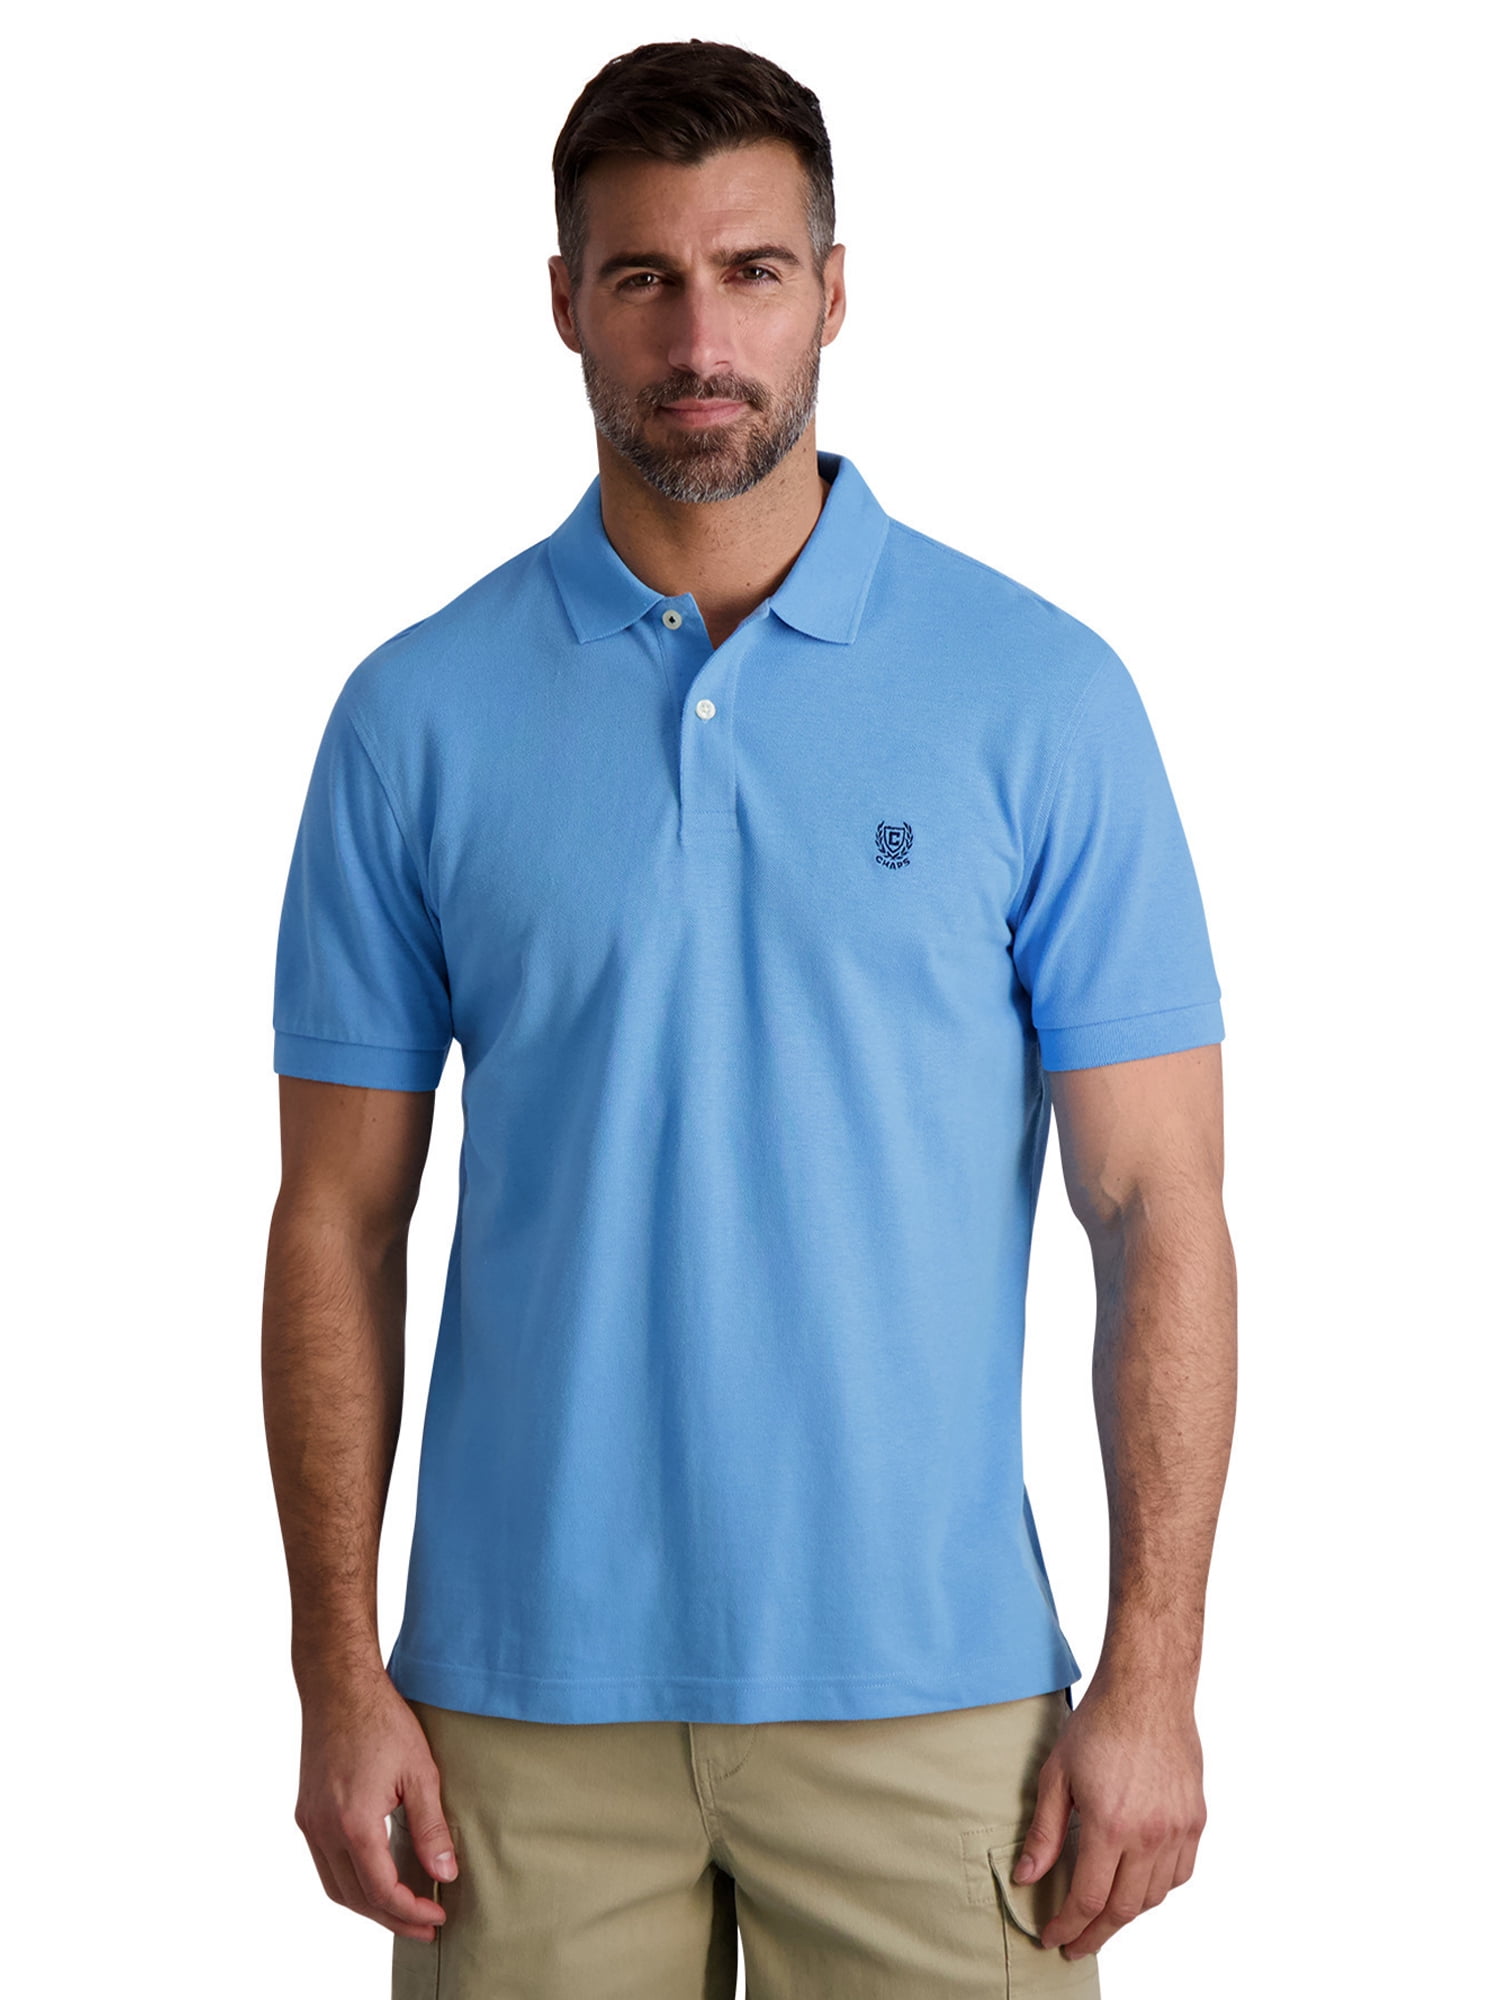 Chaps Men’s Classic Fit Everyday Solid Pique Polo Shirt, Sizes XS-4XB ...